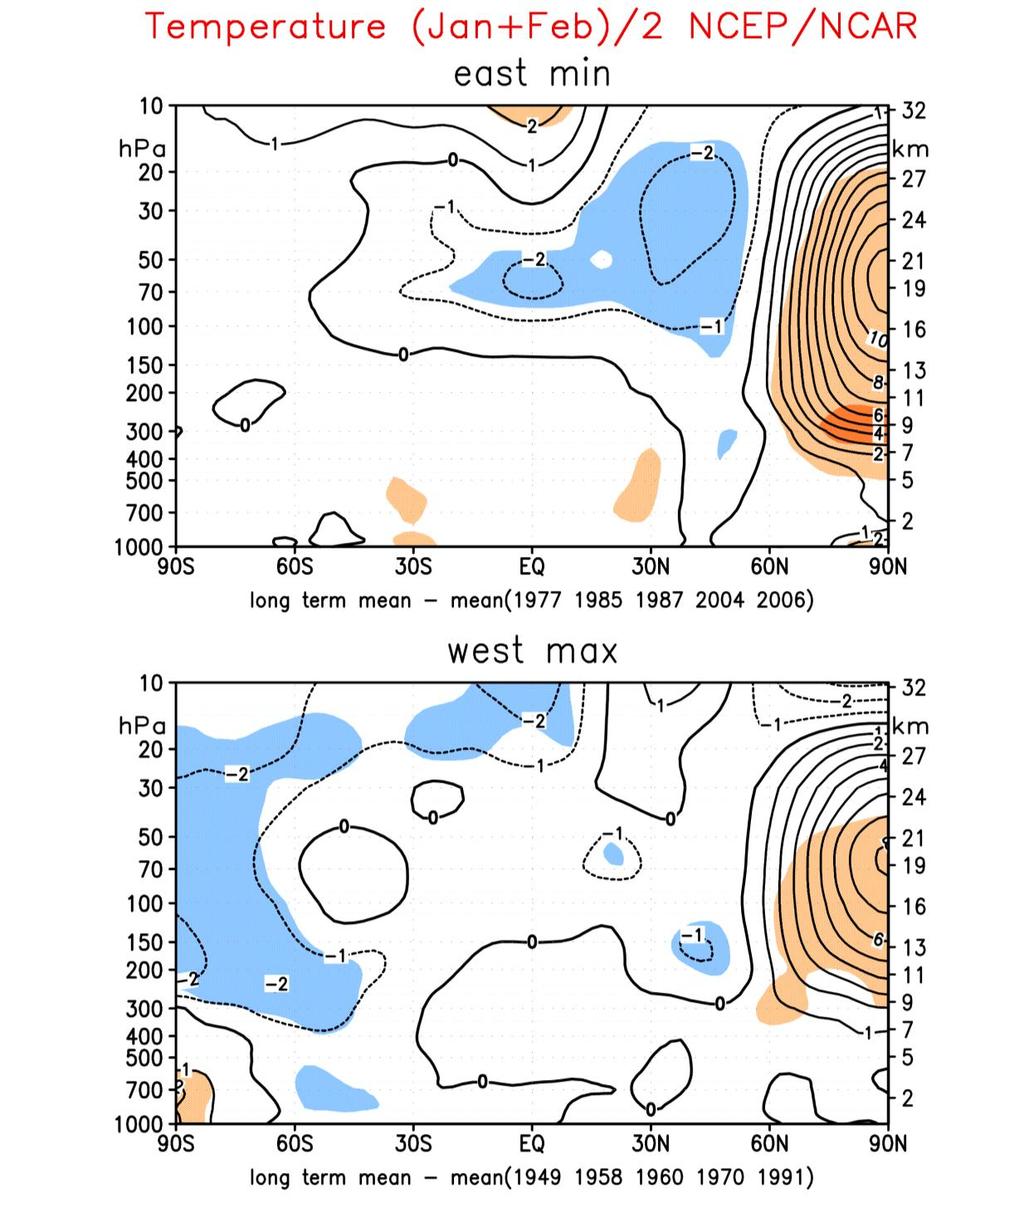 - east/min: 5 strongest MMWs + 11 K Composites of Temperature